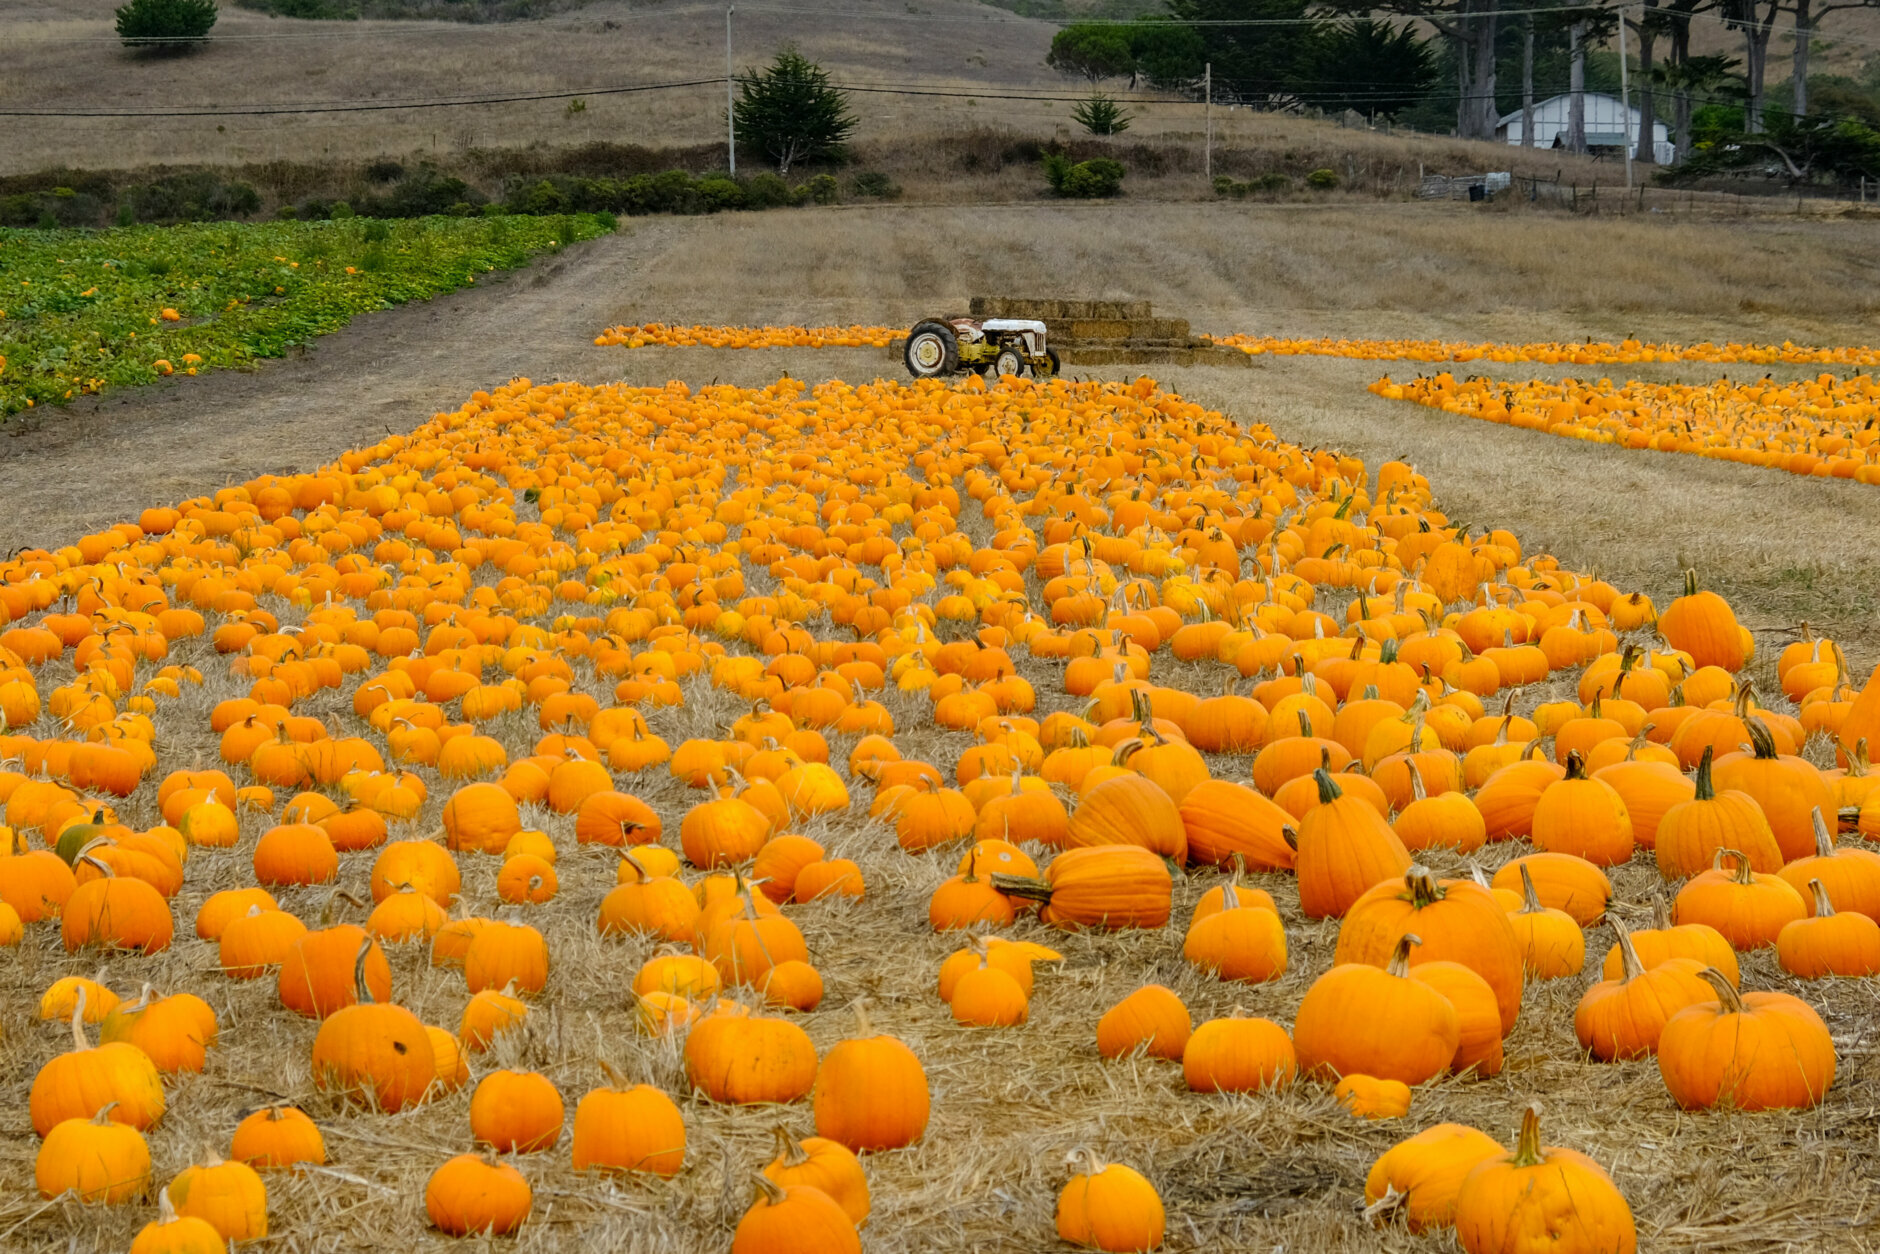 Pumpkin farm with tractor in the background